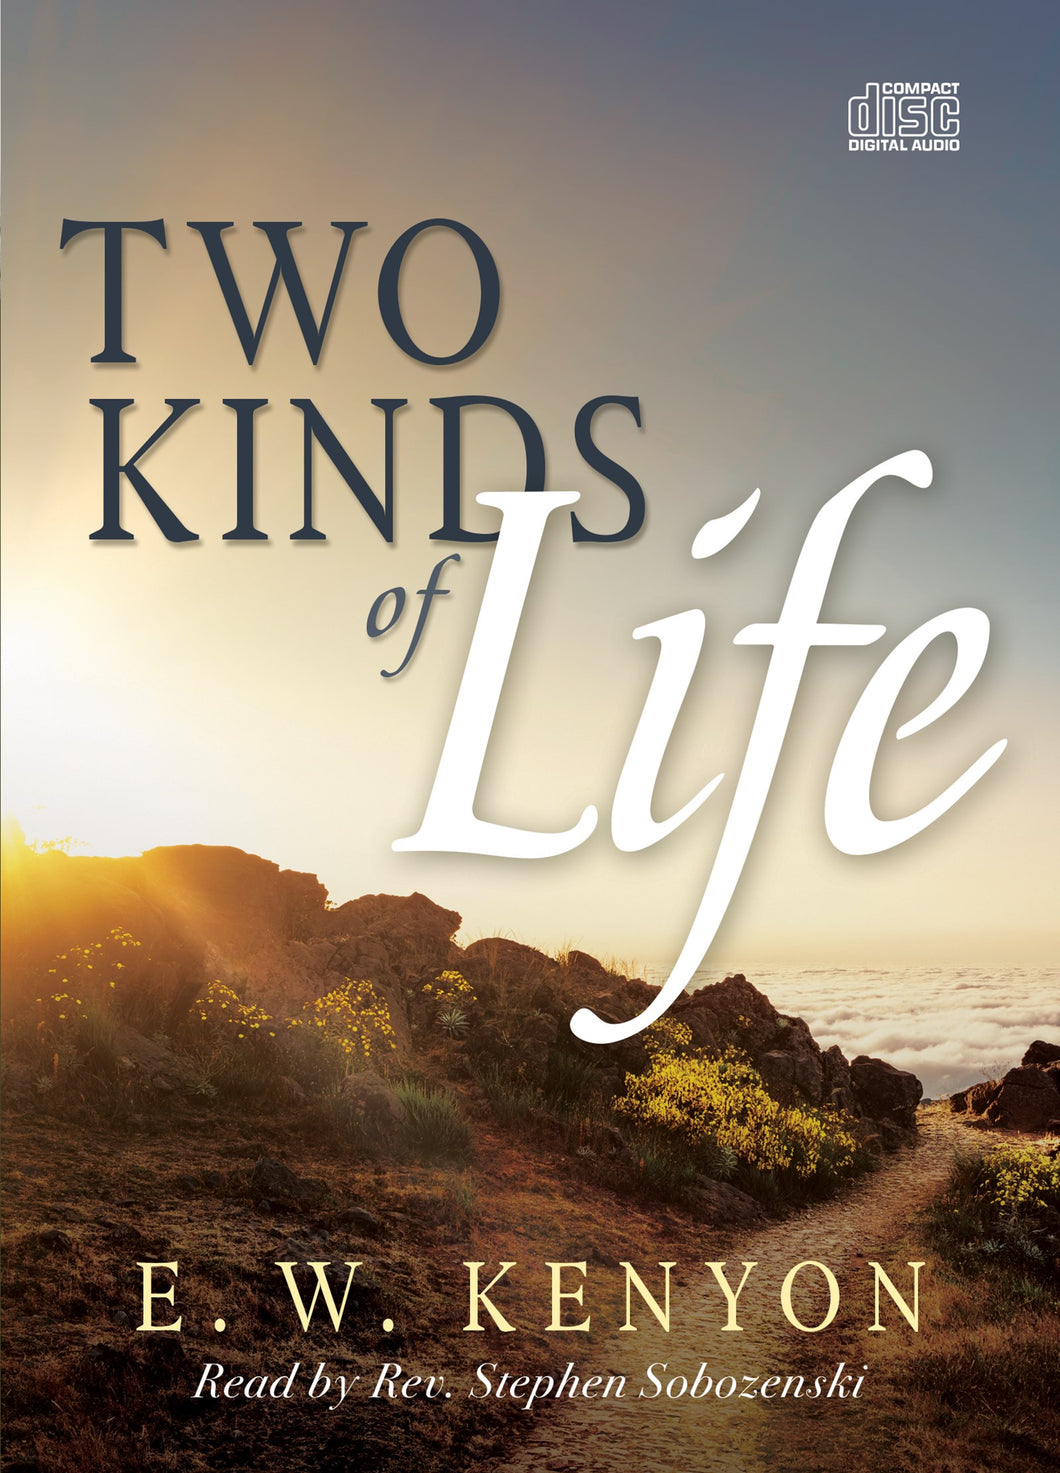 Audiobook-Audio CD-Two Kinds Of Life (5 CD)